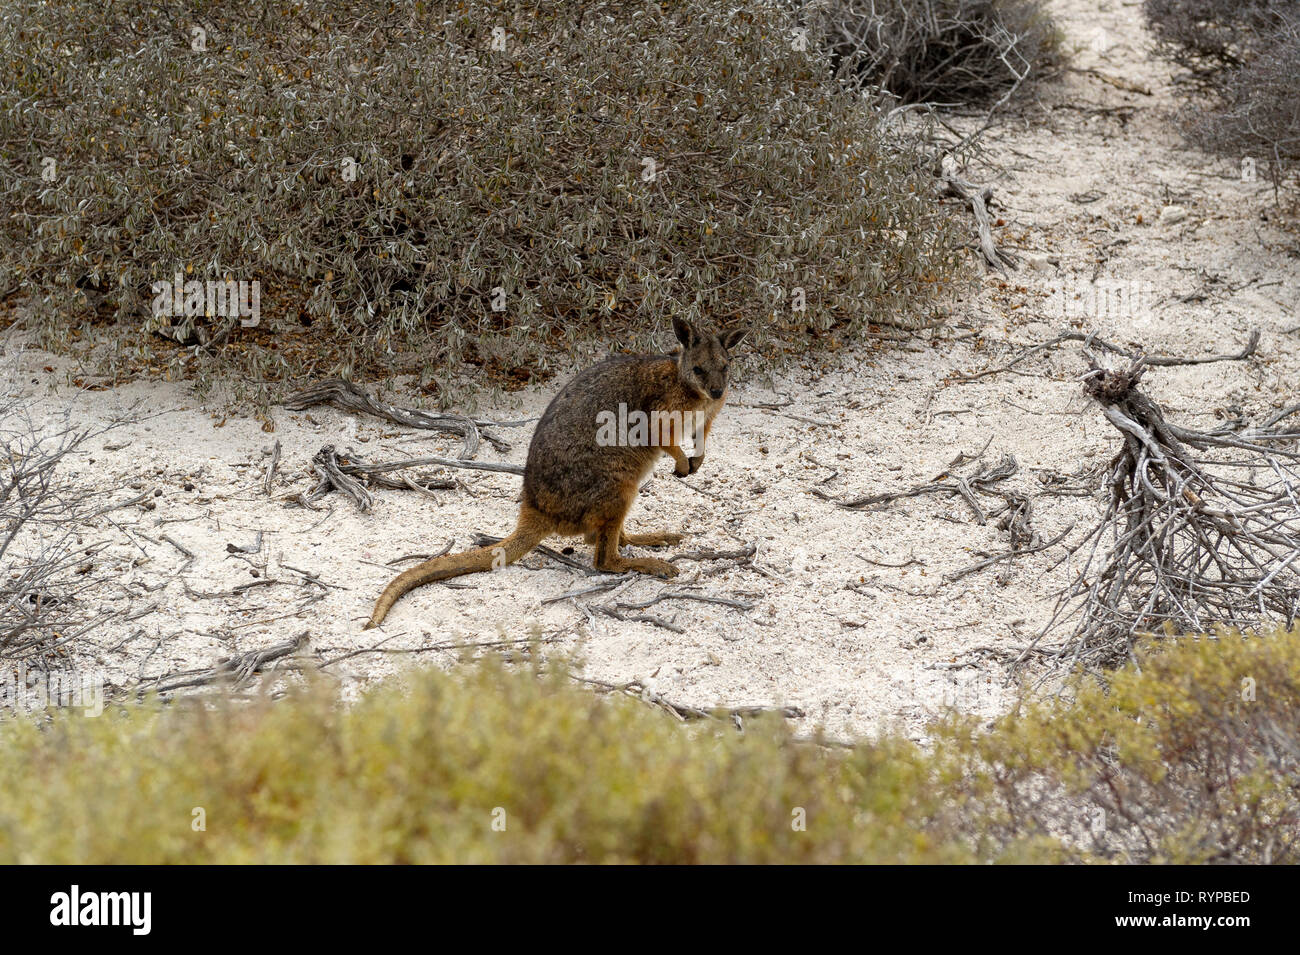 A Tammar Wallaby on West Wallabi Island in the Wallabi Group. The Houtman Abrolhos islands lie 60 kilometres off the coast of Geraldton in Western Aus Stock Photo